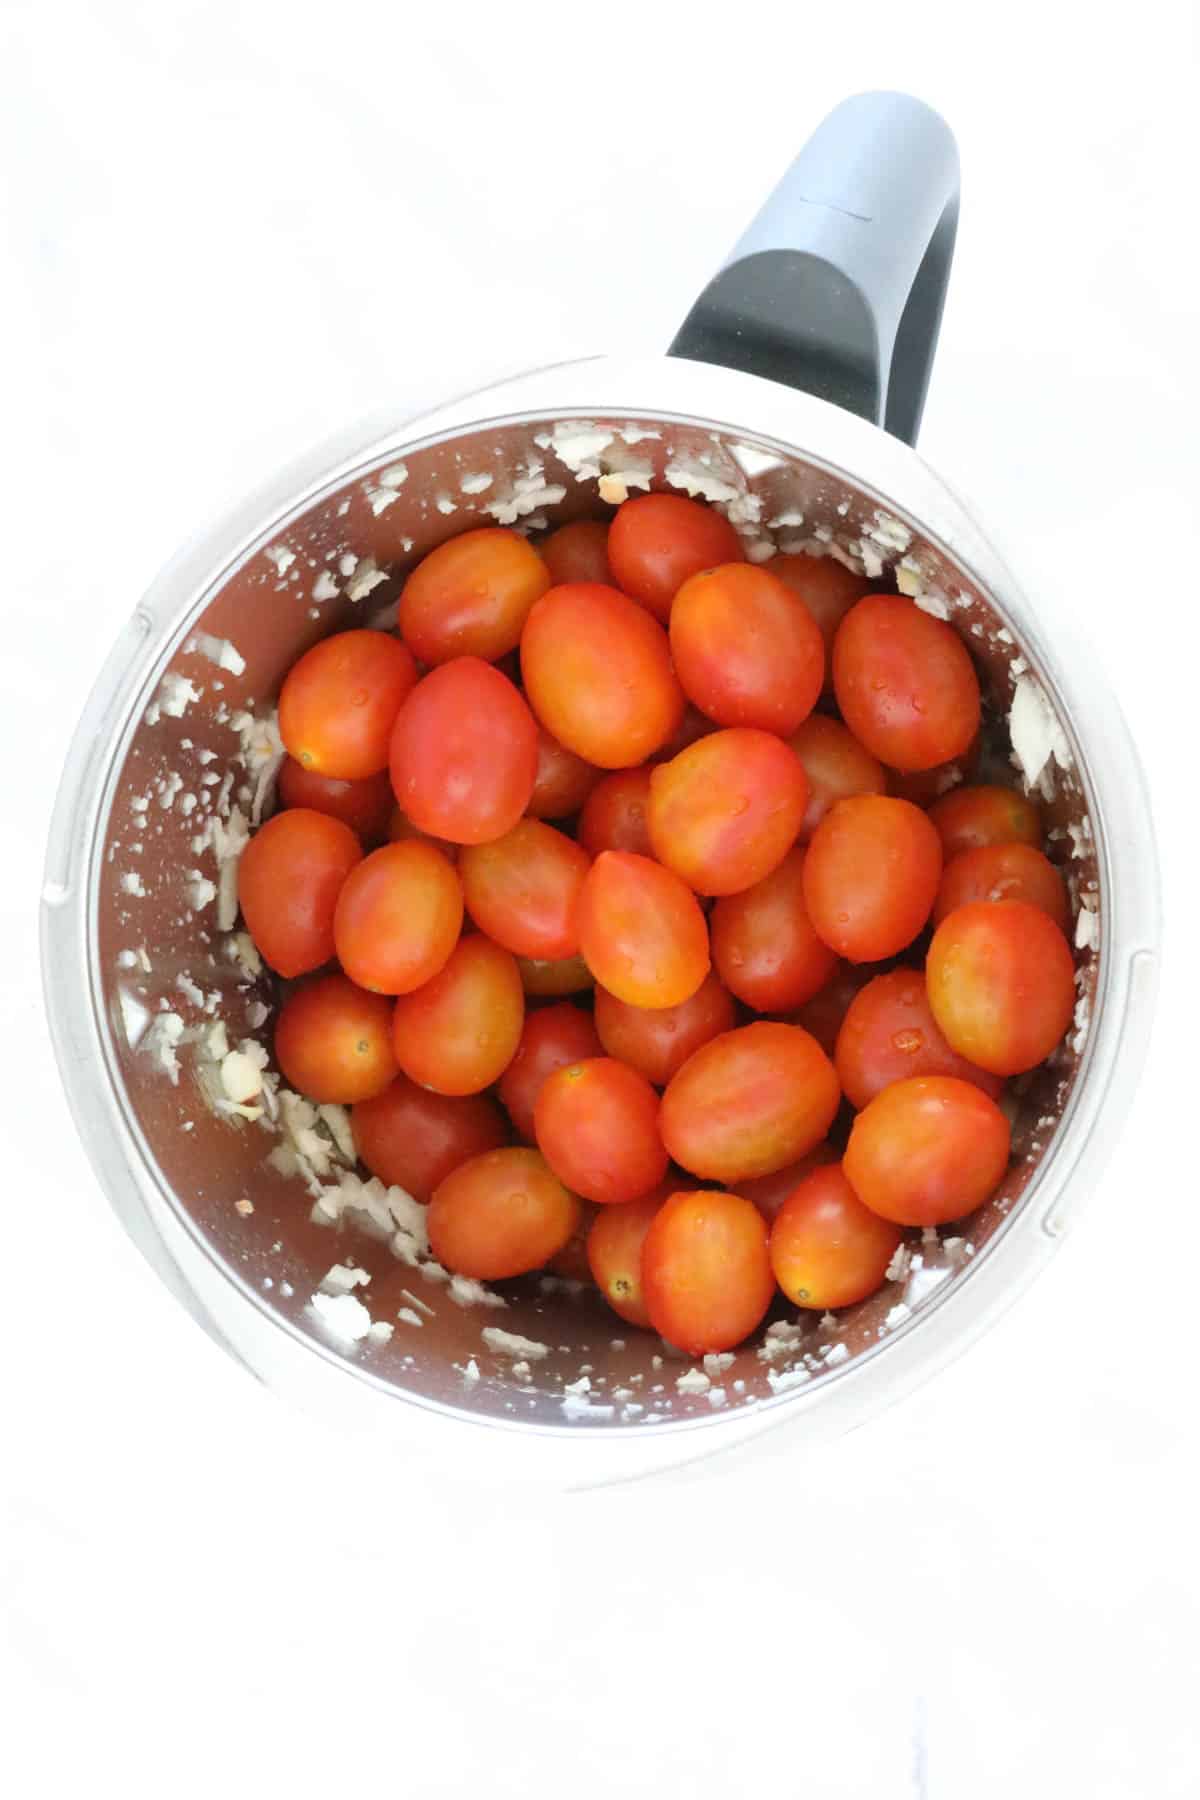 Cherry tomatoes ina Thermomix.